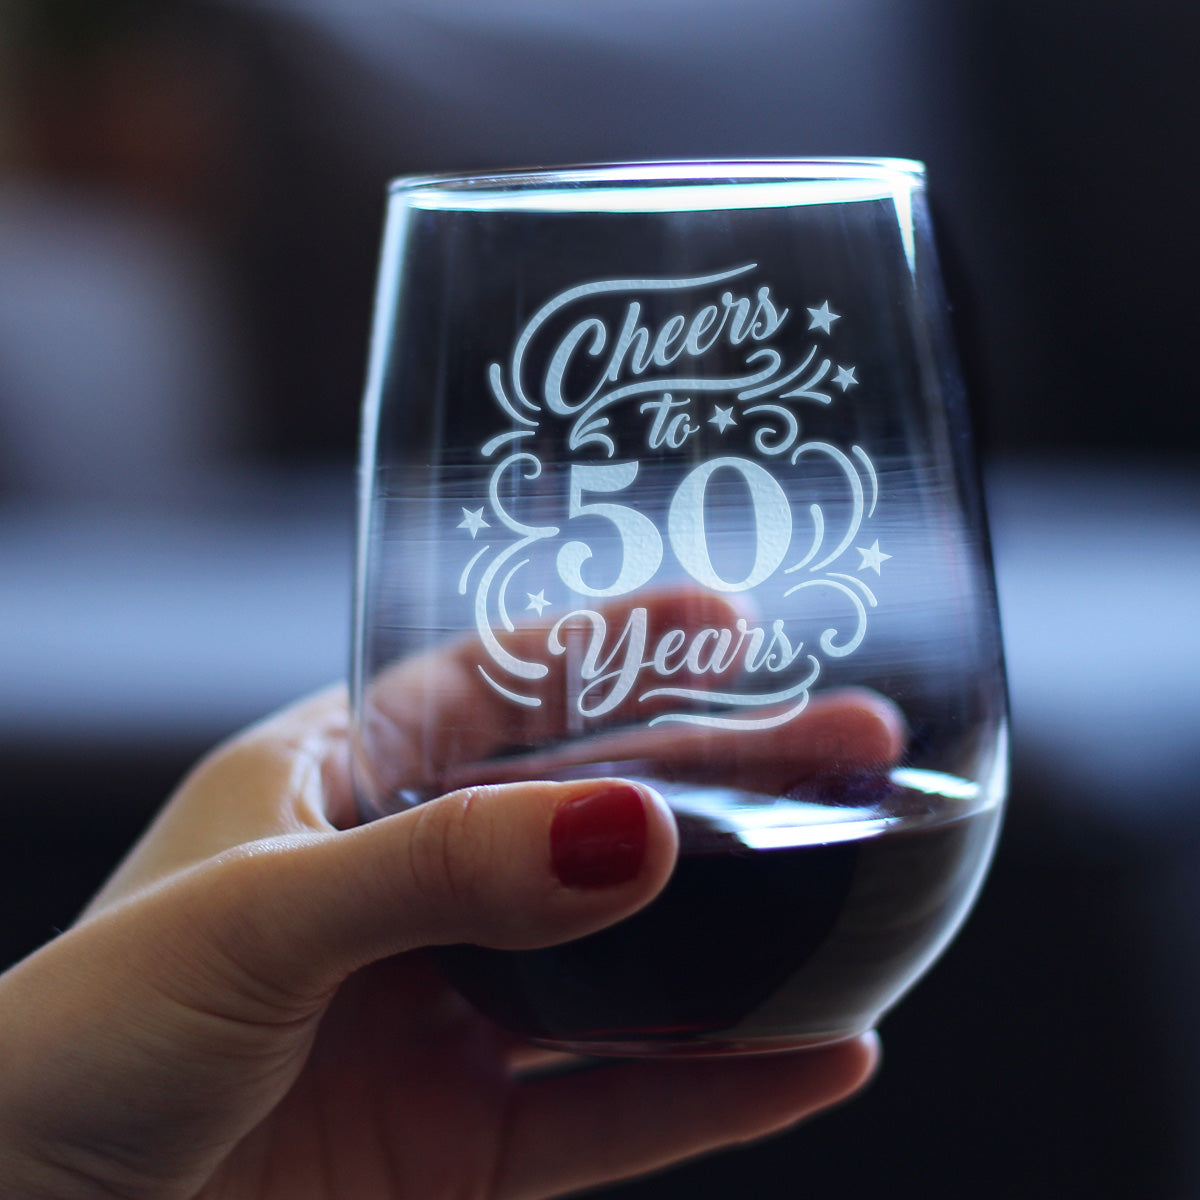 Cheers to 50 Years - Stemless Wine Glass Gifts for Women &amp; Men - 50th Anniversary or Birthday Party Decor - Large Glasses